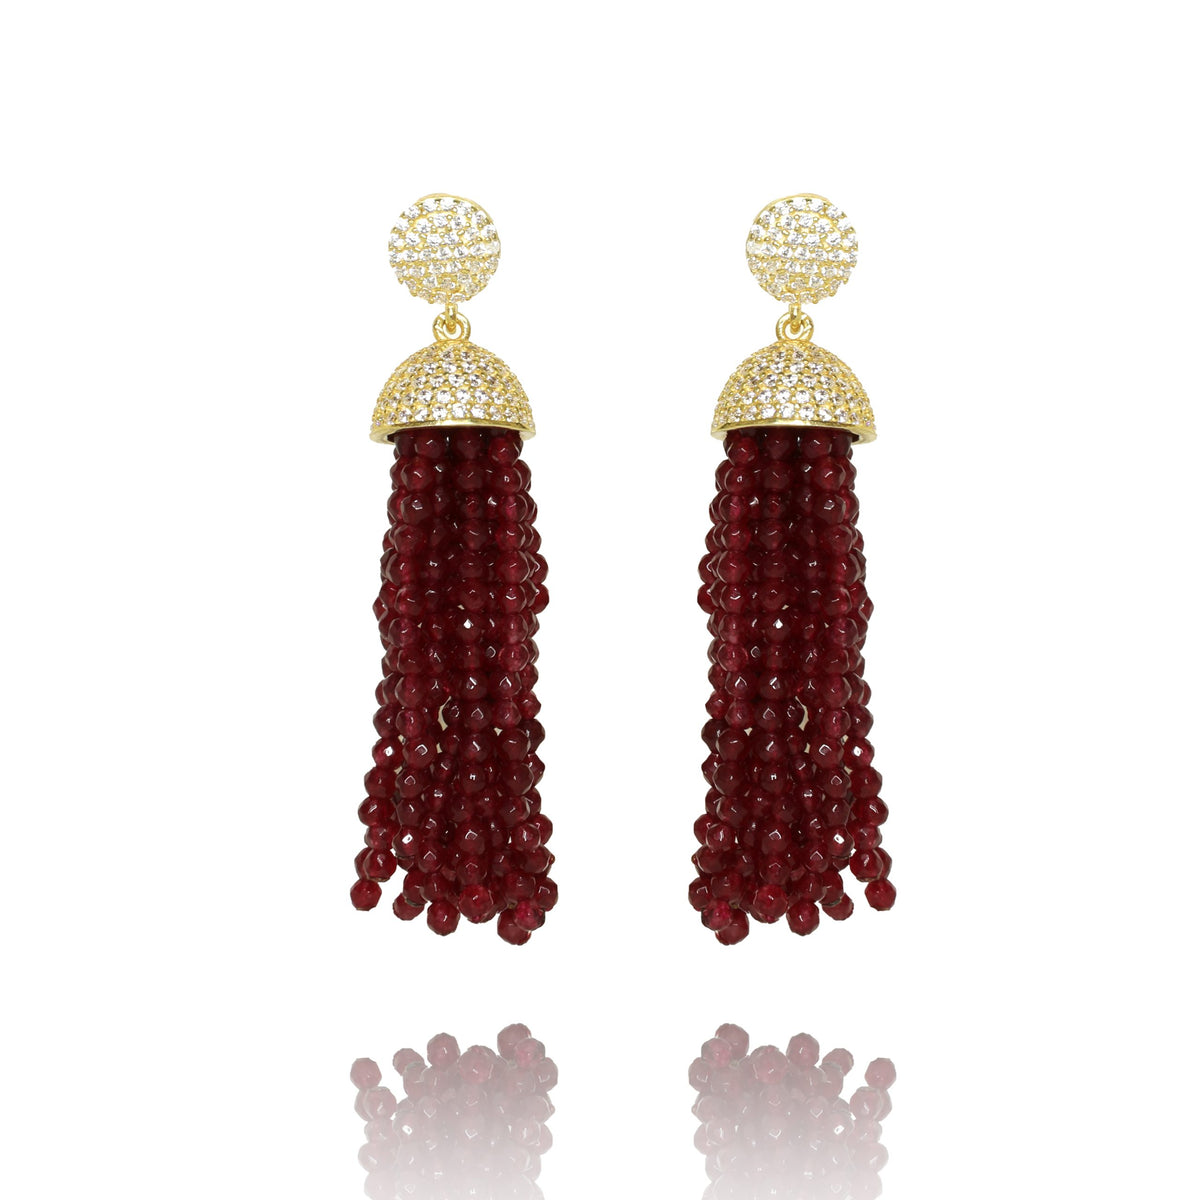 Vintage Natural Red Agate Beads Tassel Earrings with Crystals